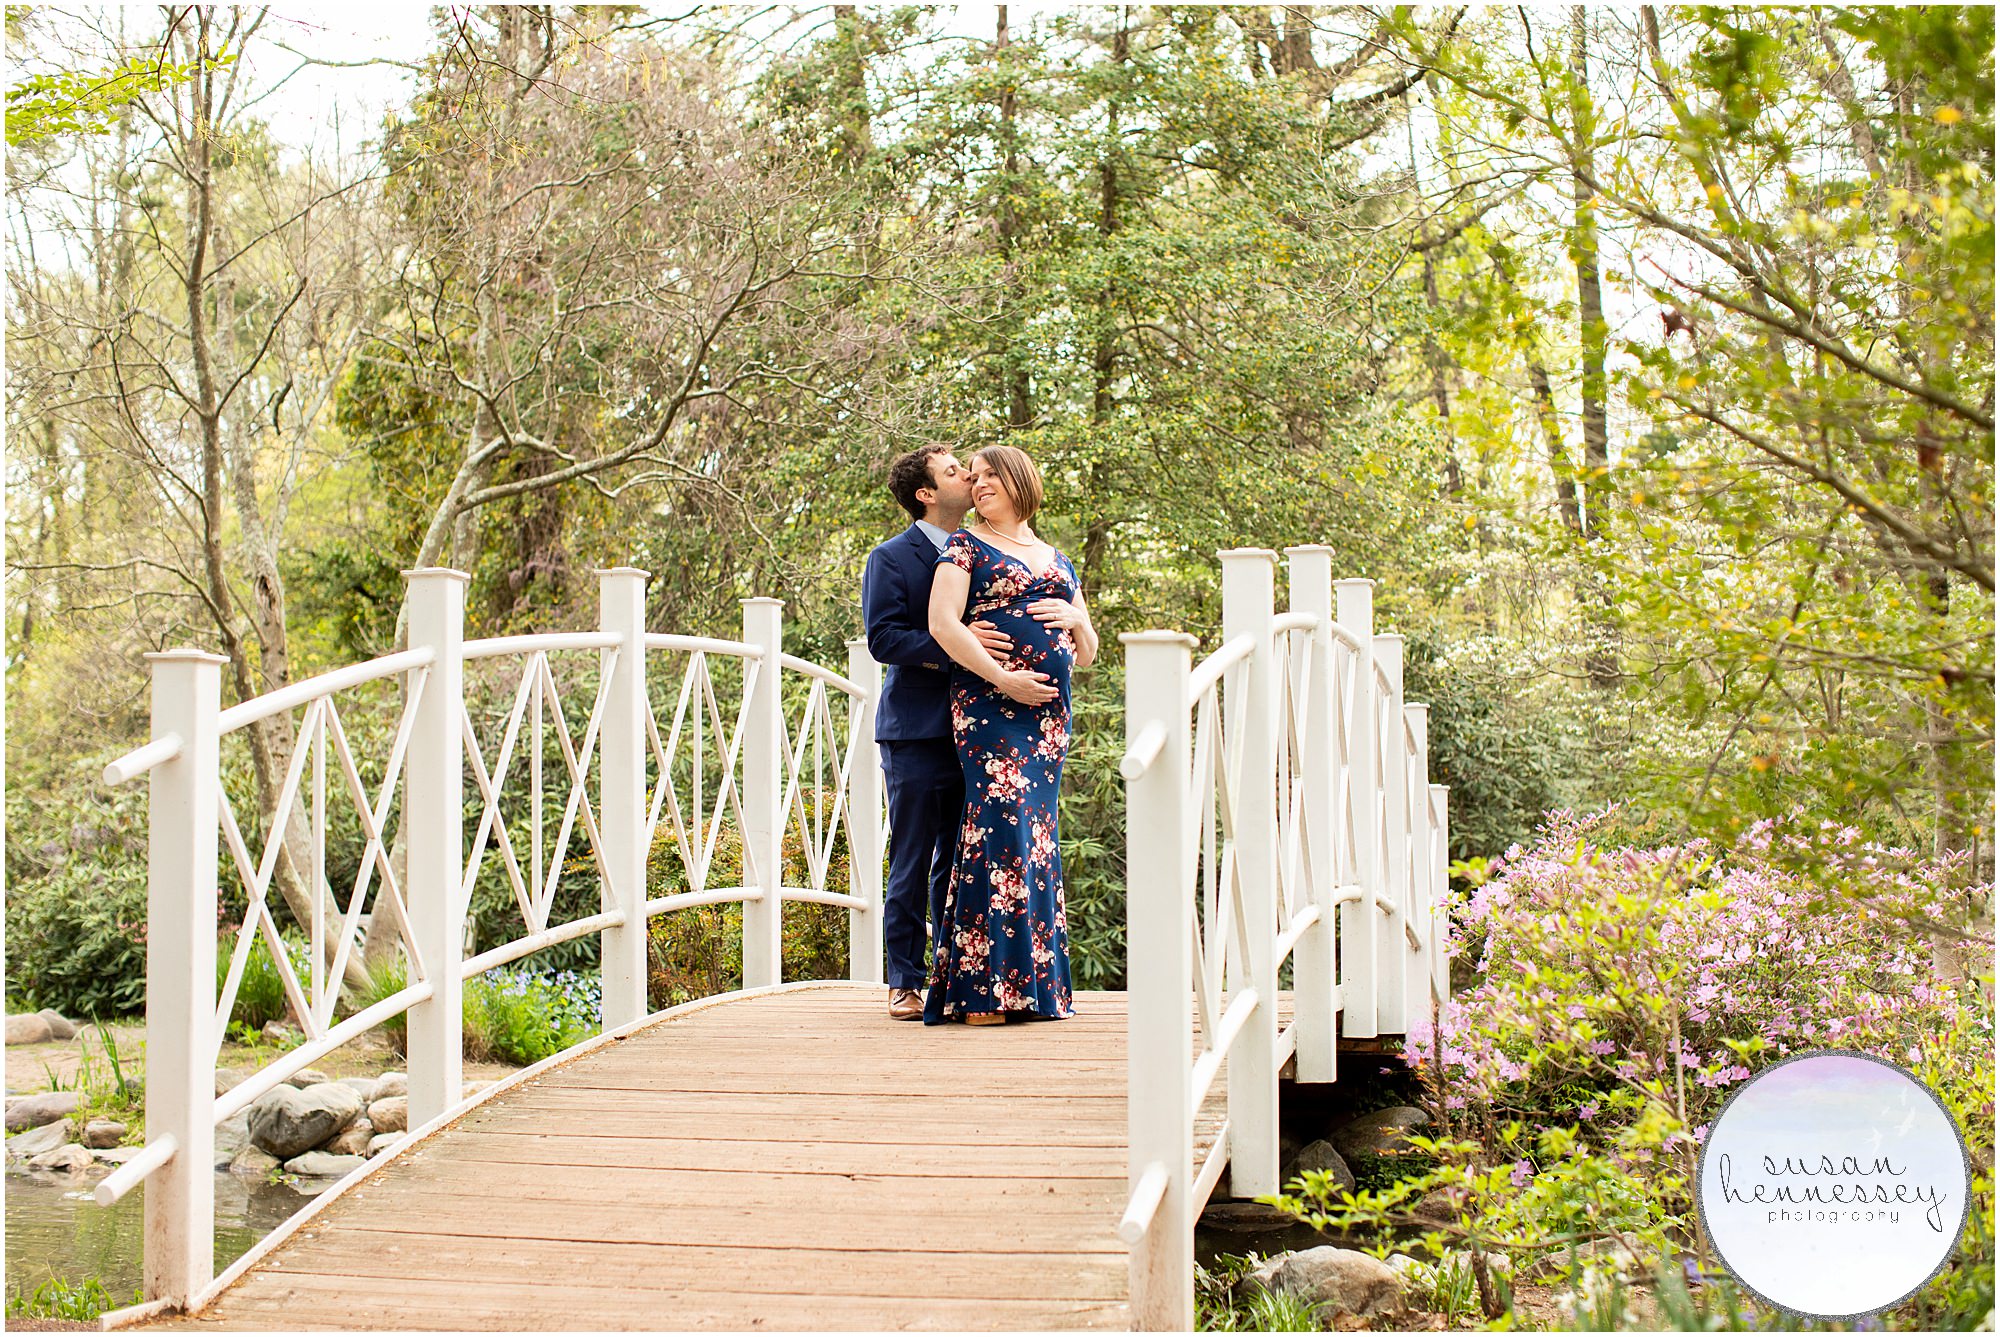 A pregnant mother and her husband at her maternity session at Sayen Gardens